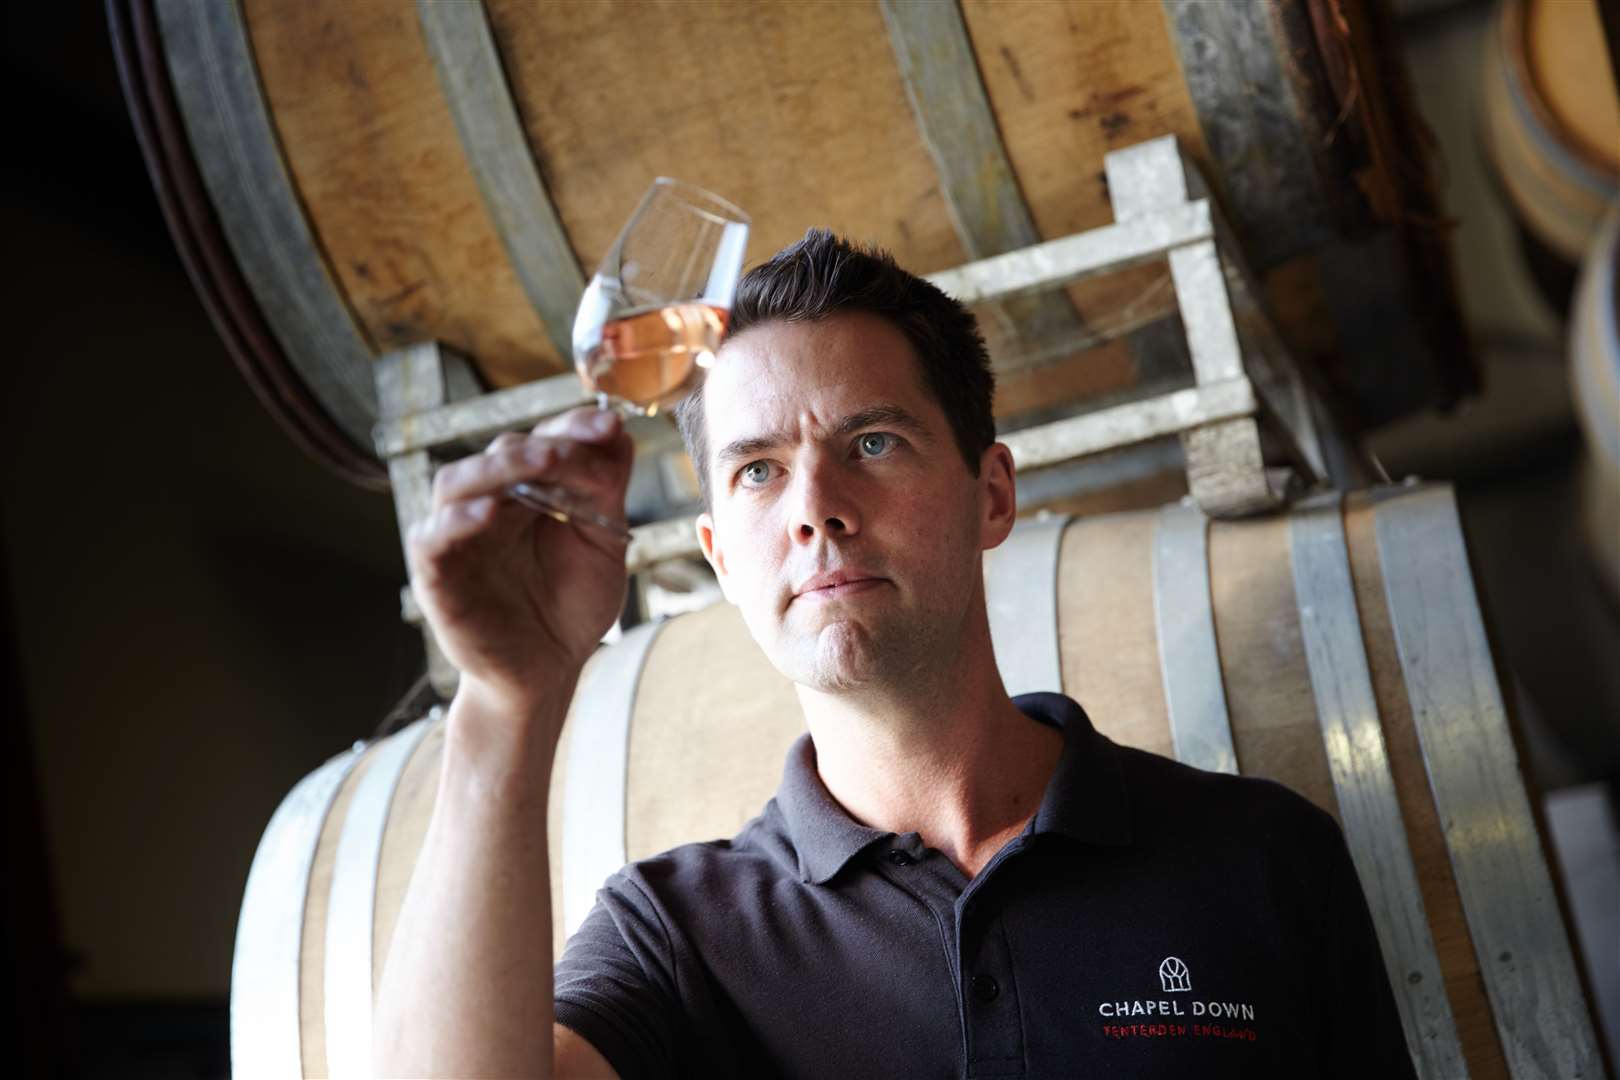 Josh Donaghay-Spire, operations director and head of wine at Chapel Down